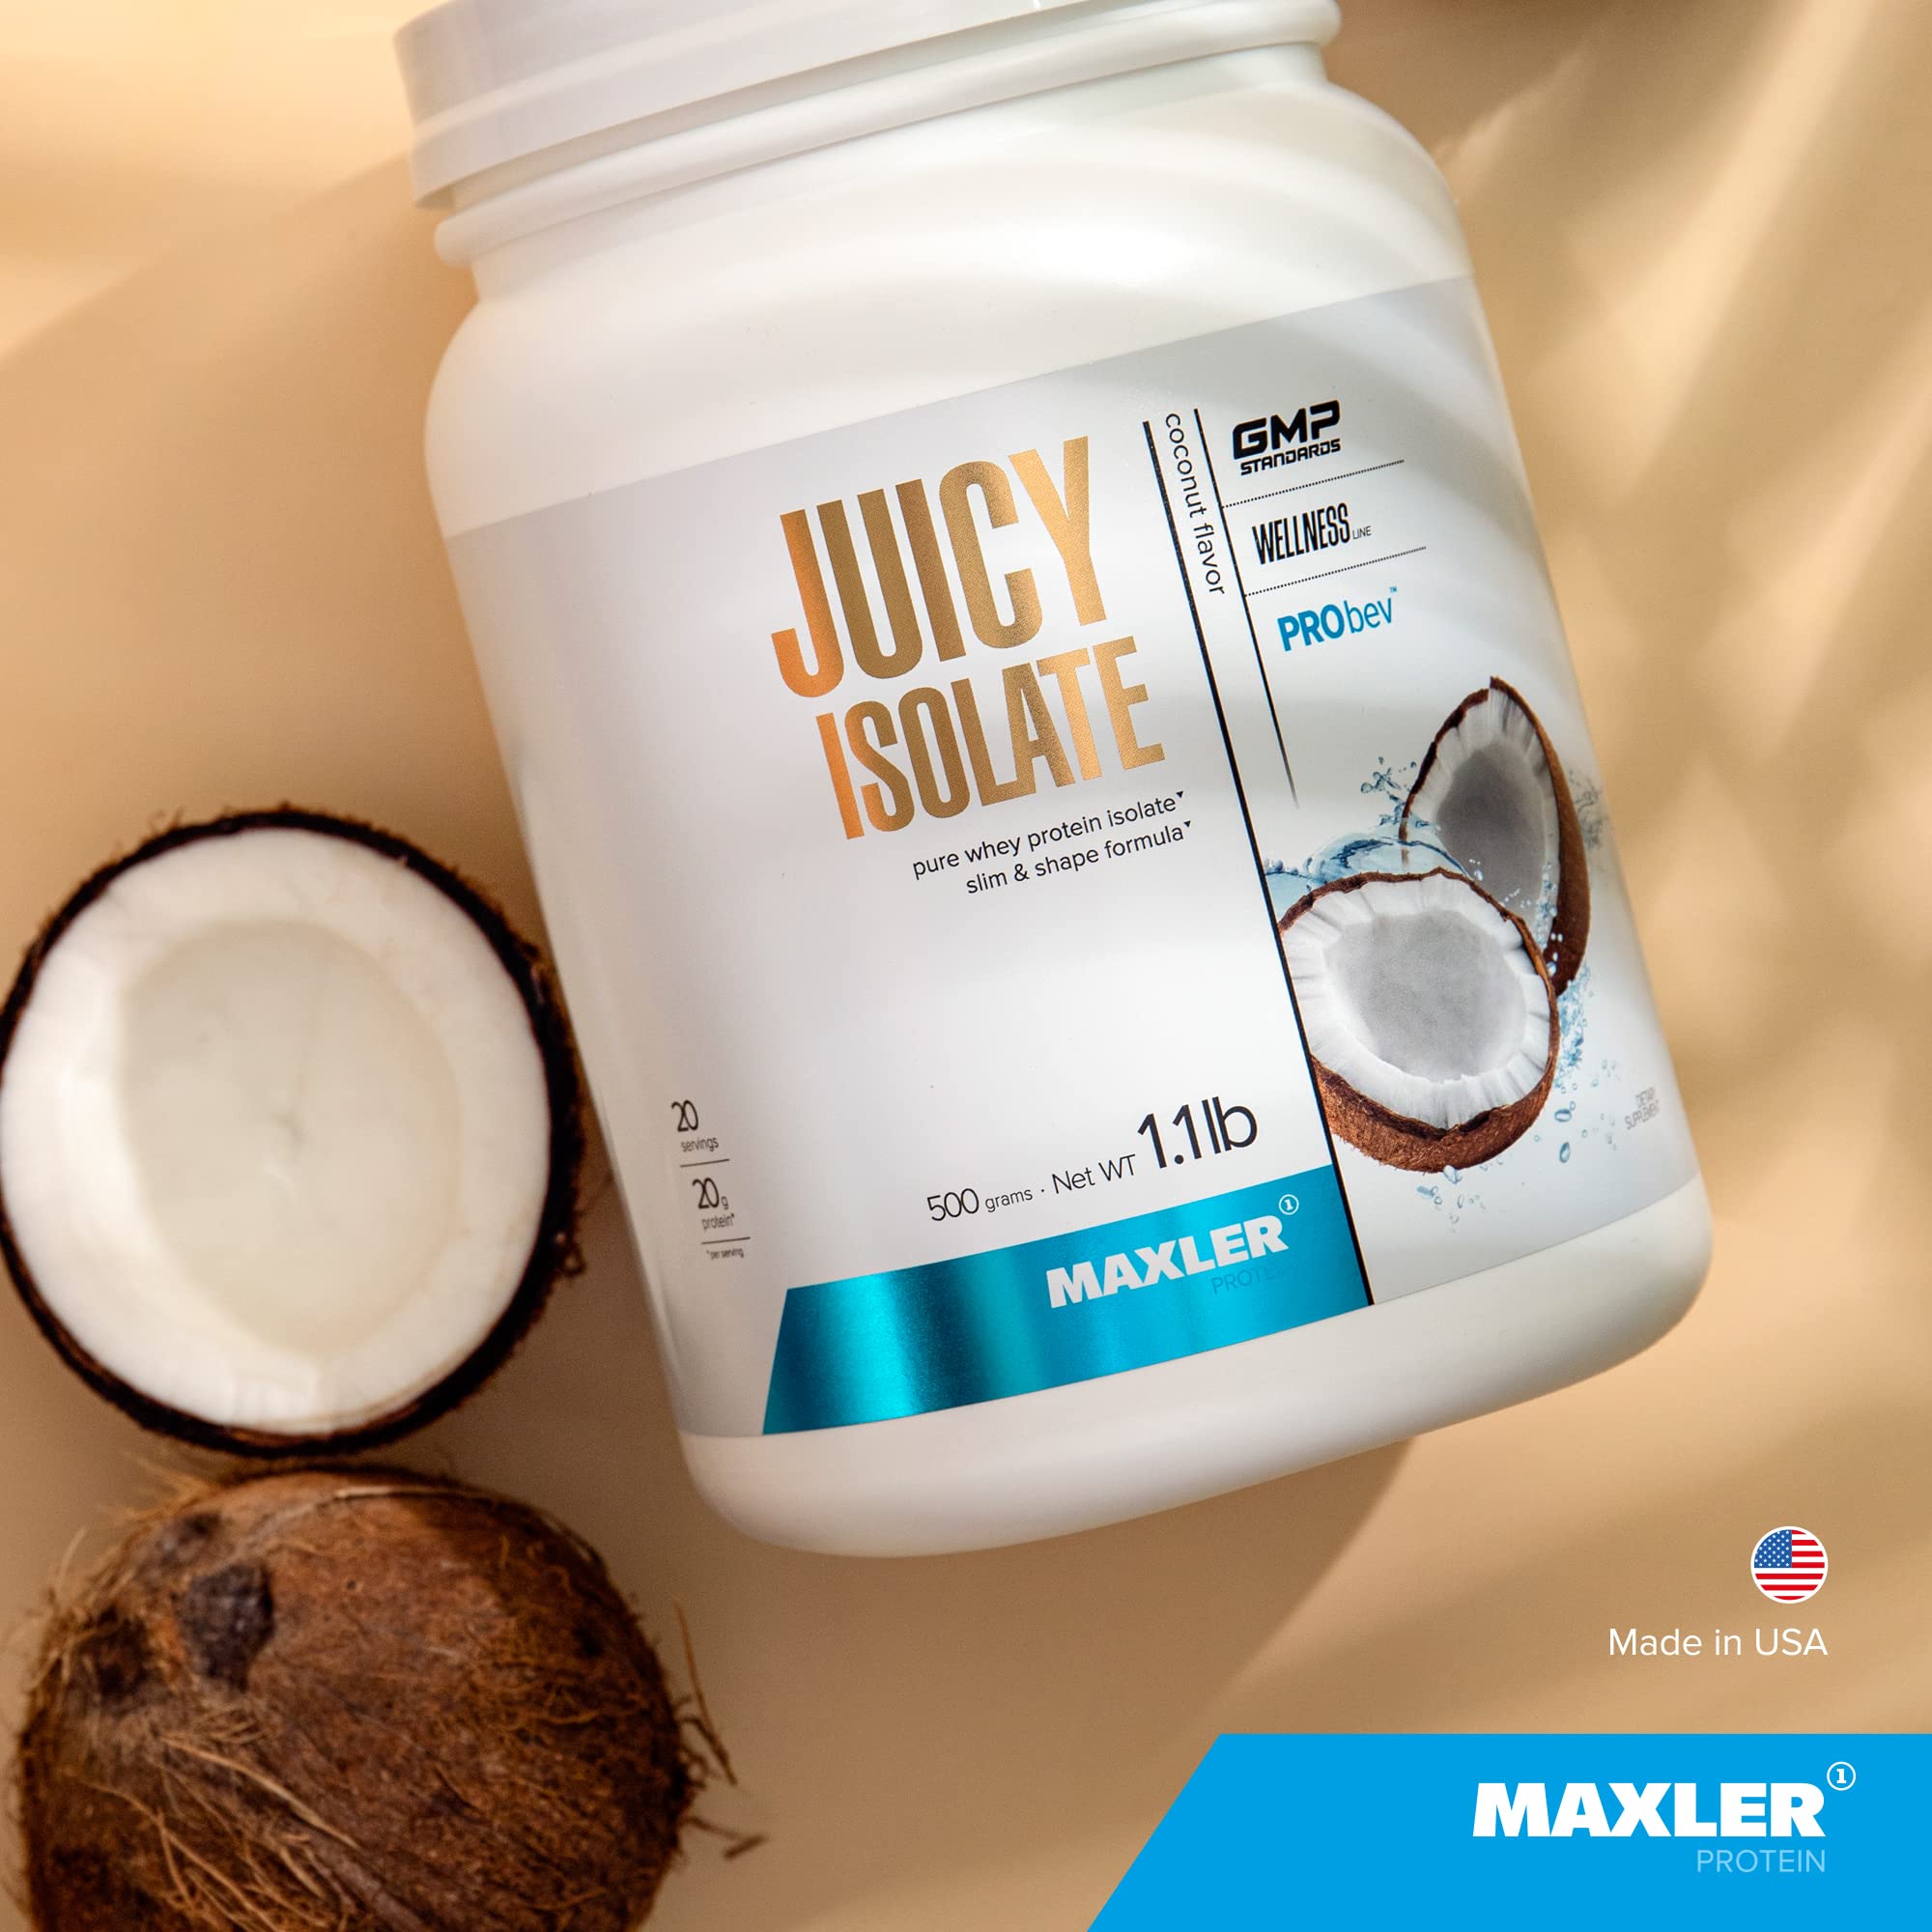 Maxler Juicy Isolate Protein Powder - Clear Whey Isolate - Fat Free, Lactose Free & Sugar Free Muscle Recovery Drink for Pre & Post Workout - 90% of Protein per Serving - Coconut 1.1 lb (20 Servings)